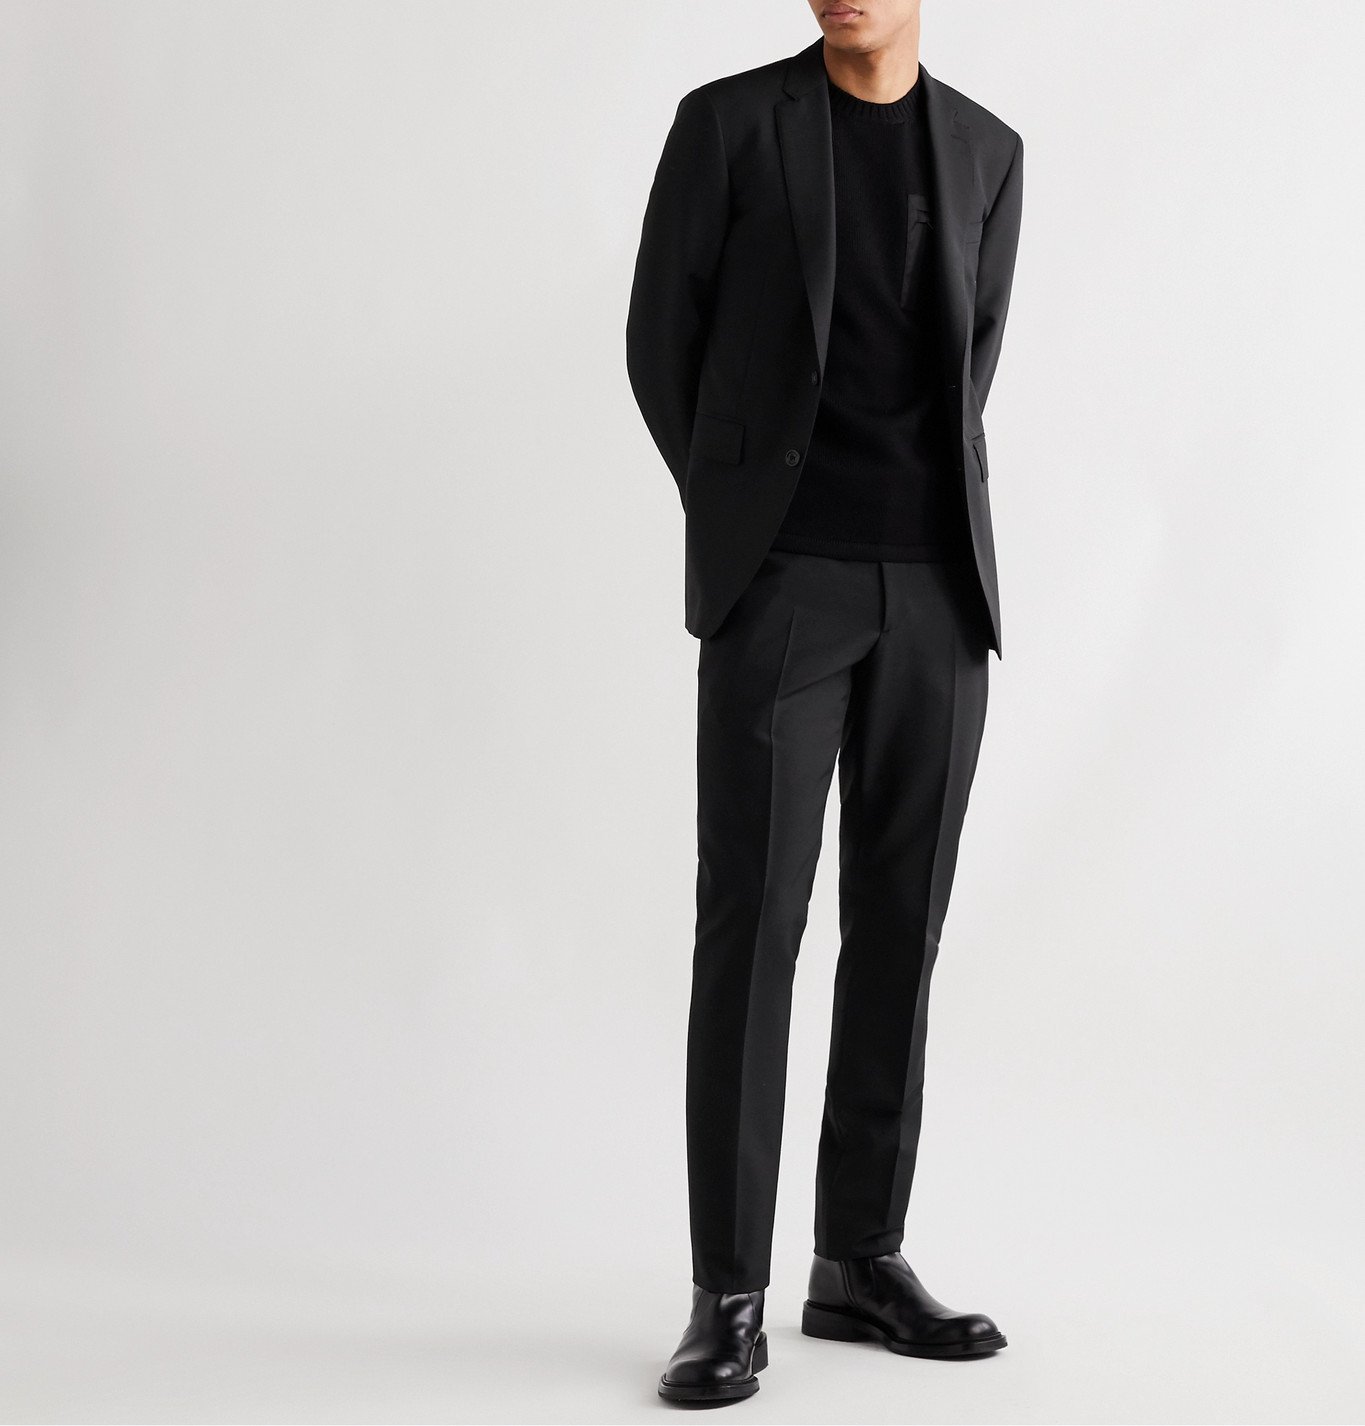 Burberry - Slim-Fit Wool and Mohair-Blend Suit - Black Burberry